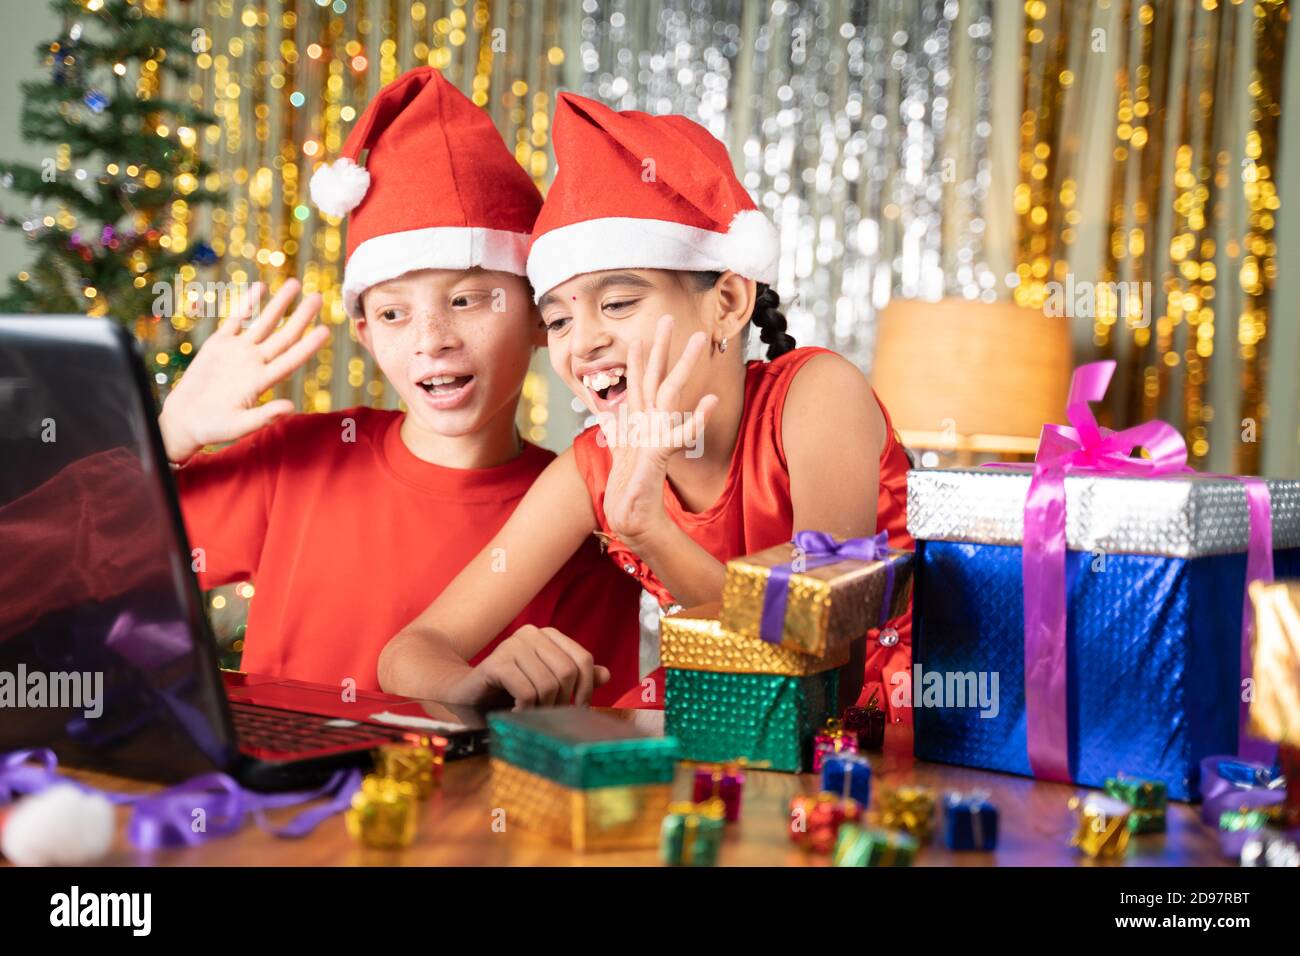 Kids got the xmas gift and Opening gift infront of Laptop on video call at home with decorated background during christmas celebration Stock Photo